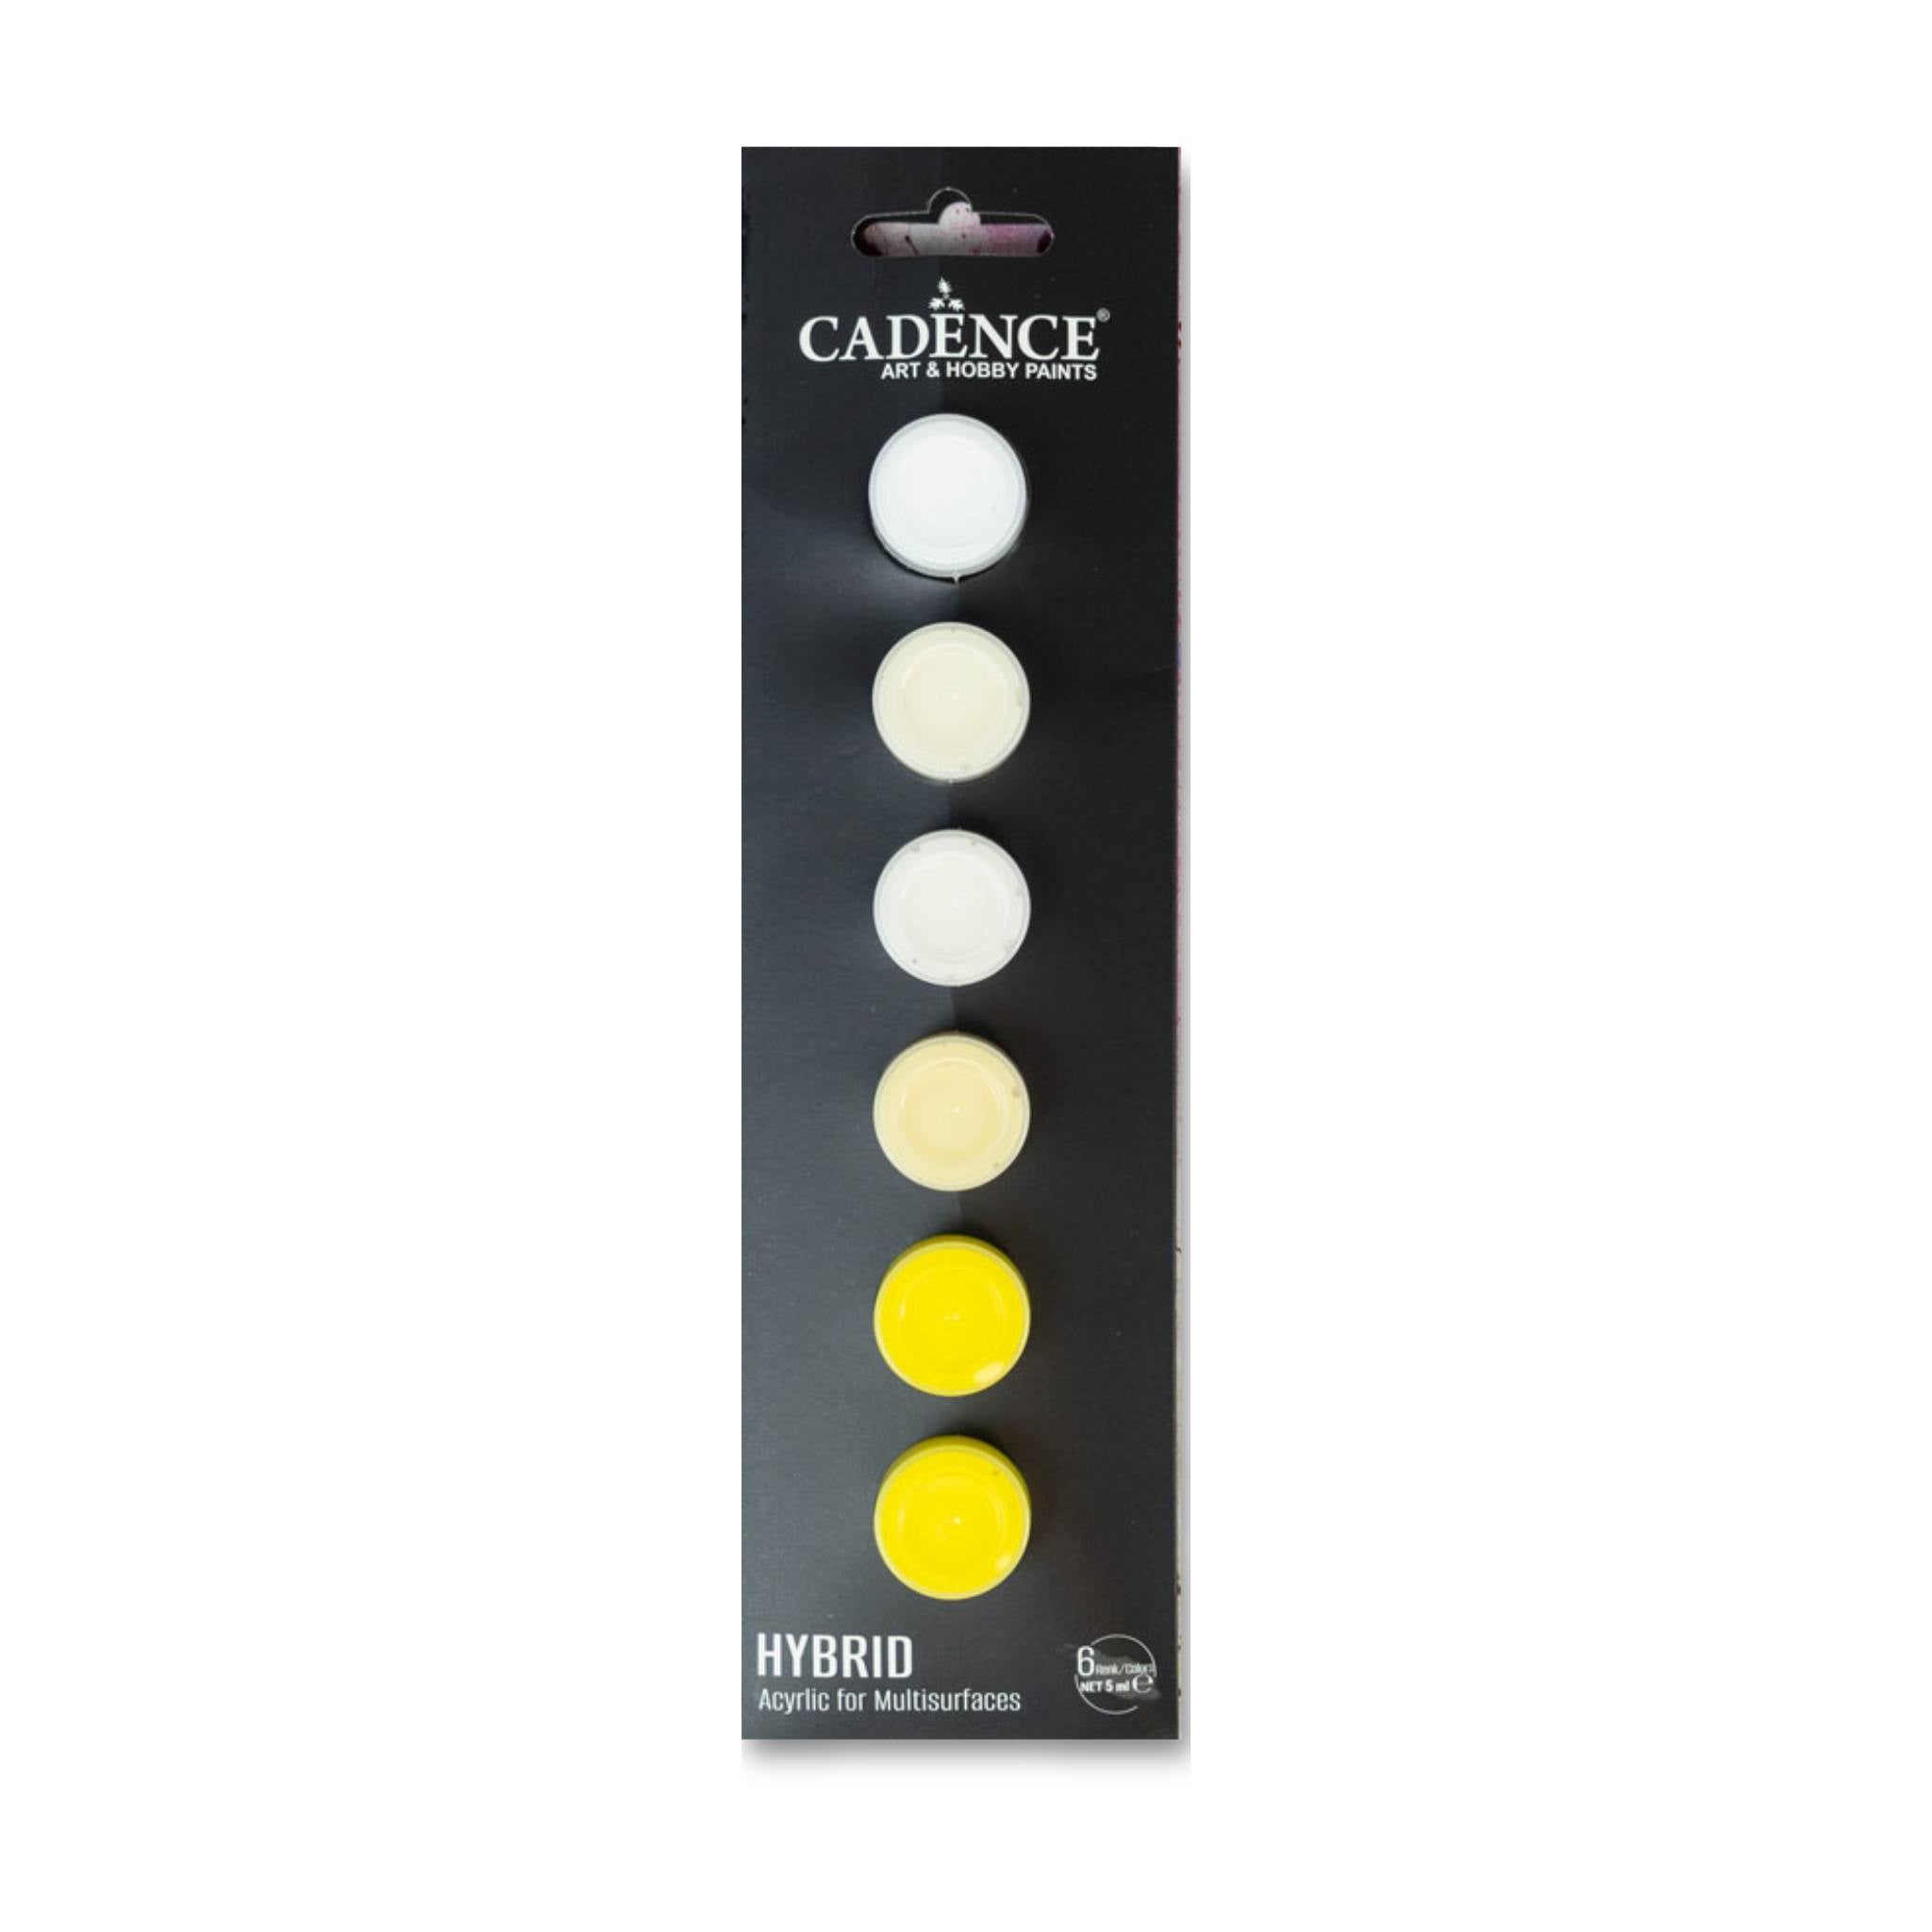 Sunny Bright Yellows and Ice White taster hybrid leather paint taster strip 